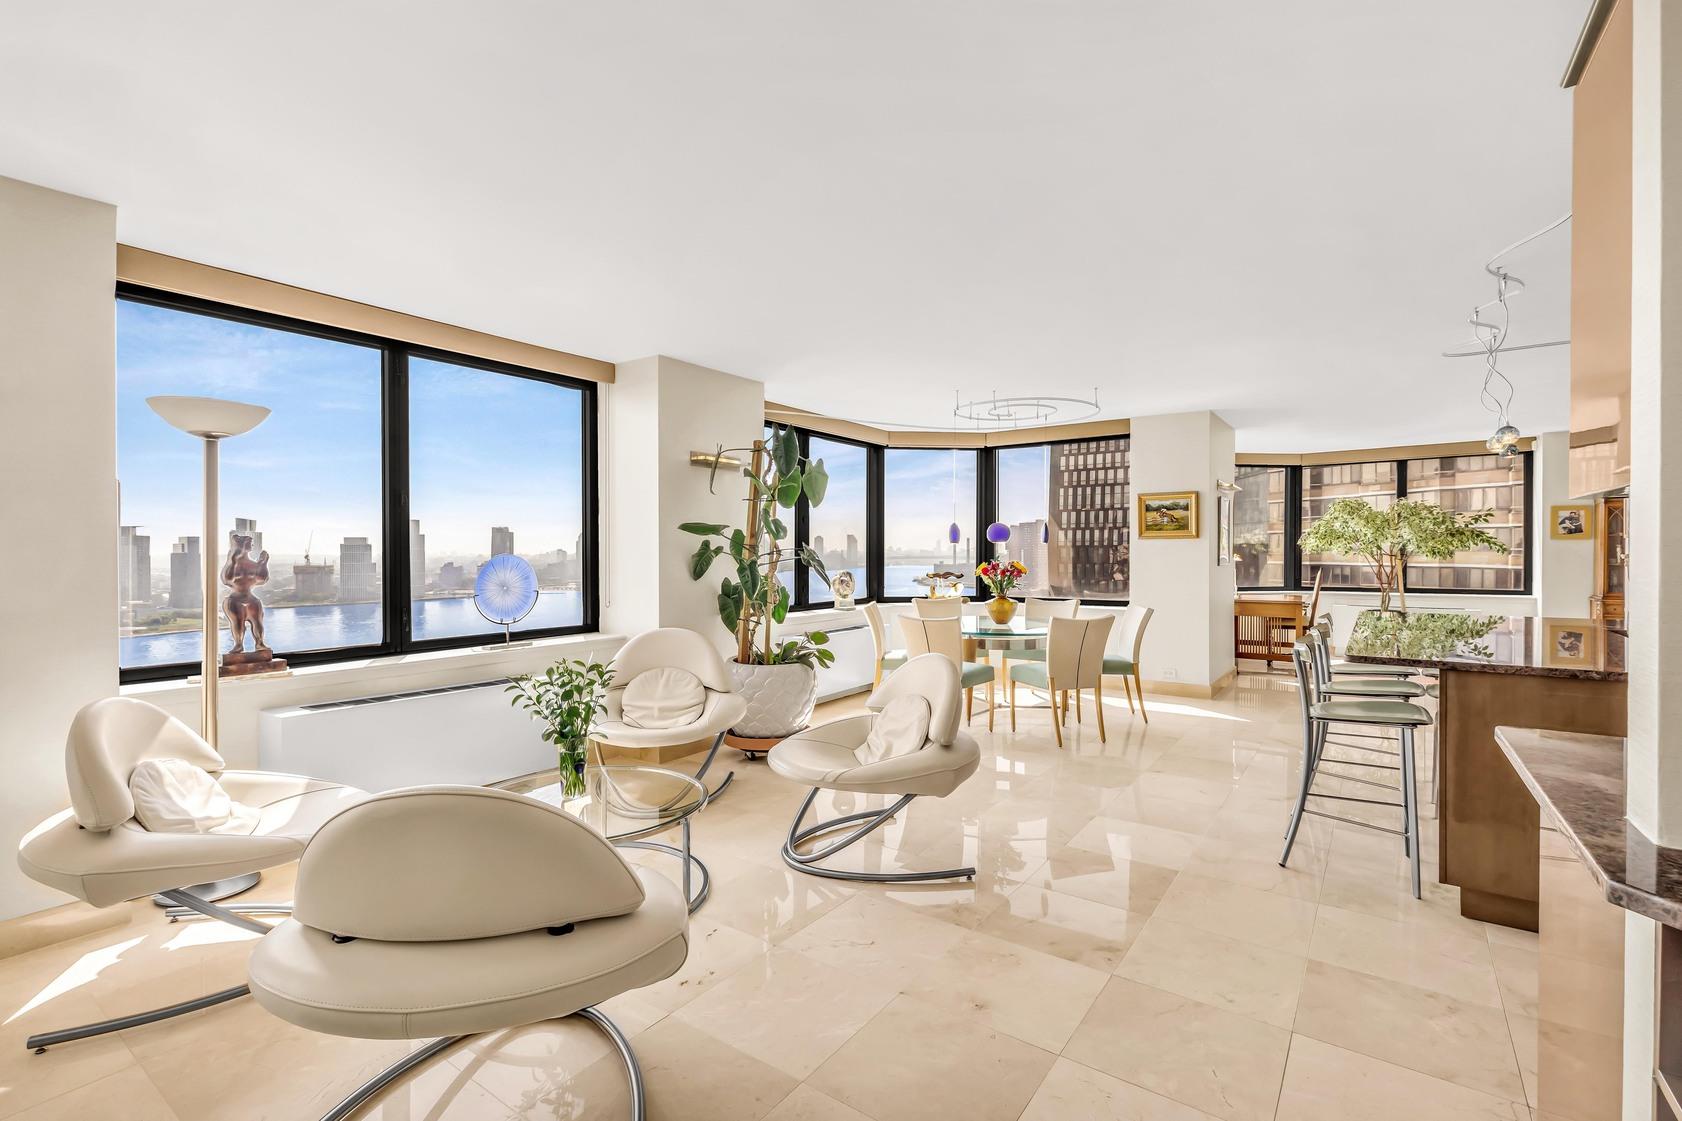 415 East 37th Street 30-Ac, Murray Hill, Midtown East, NYC - 2 Bedrooms  
3.5 Bathrooms  
5 Rooms - 